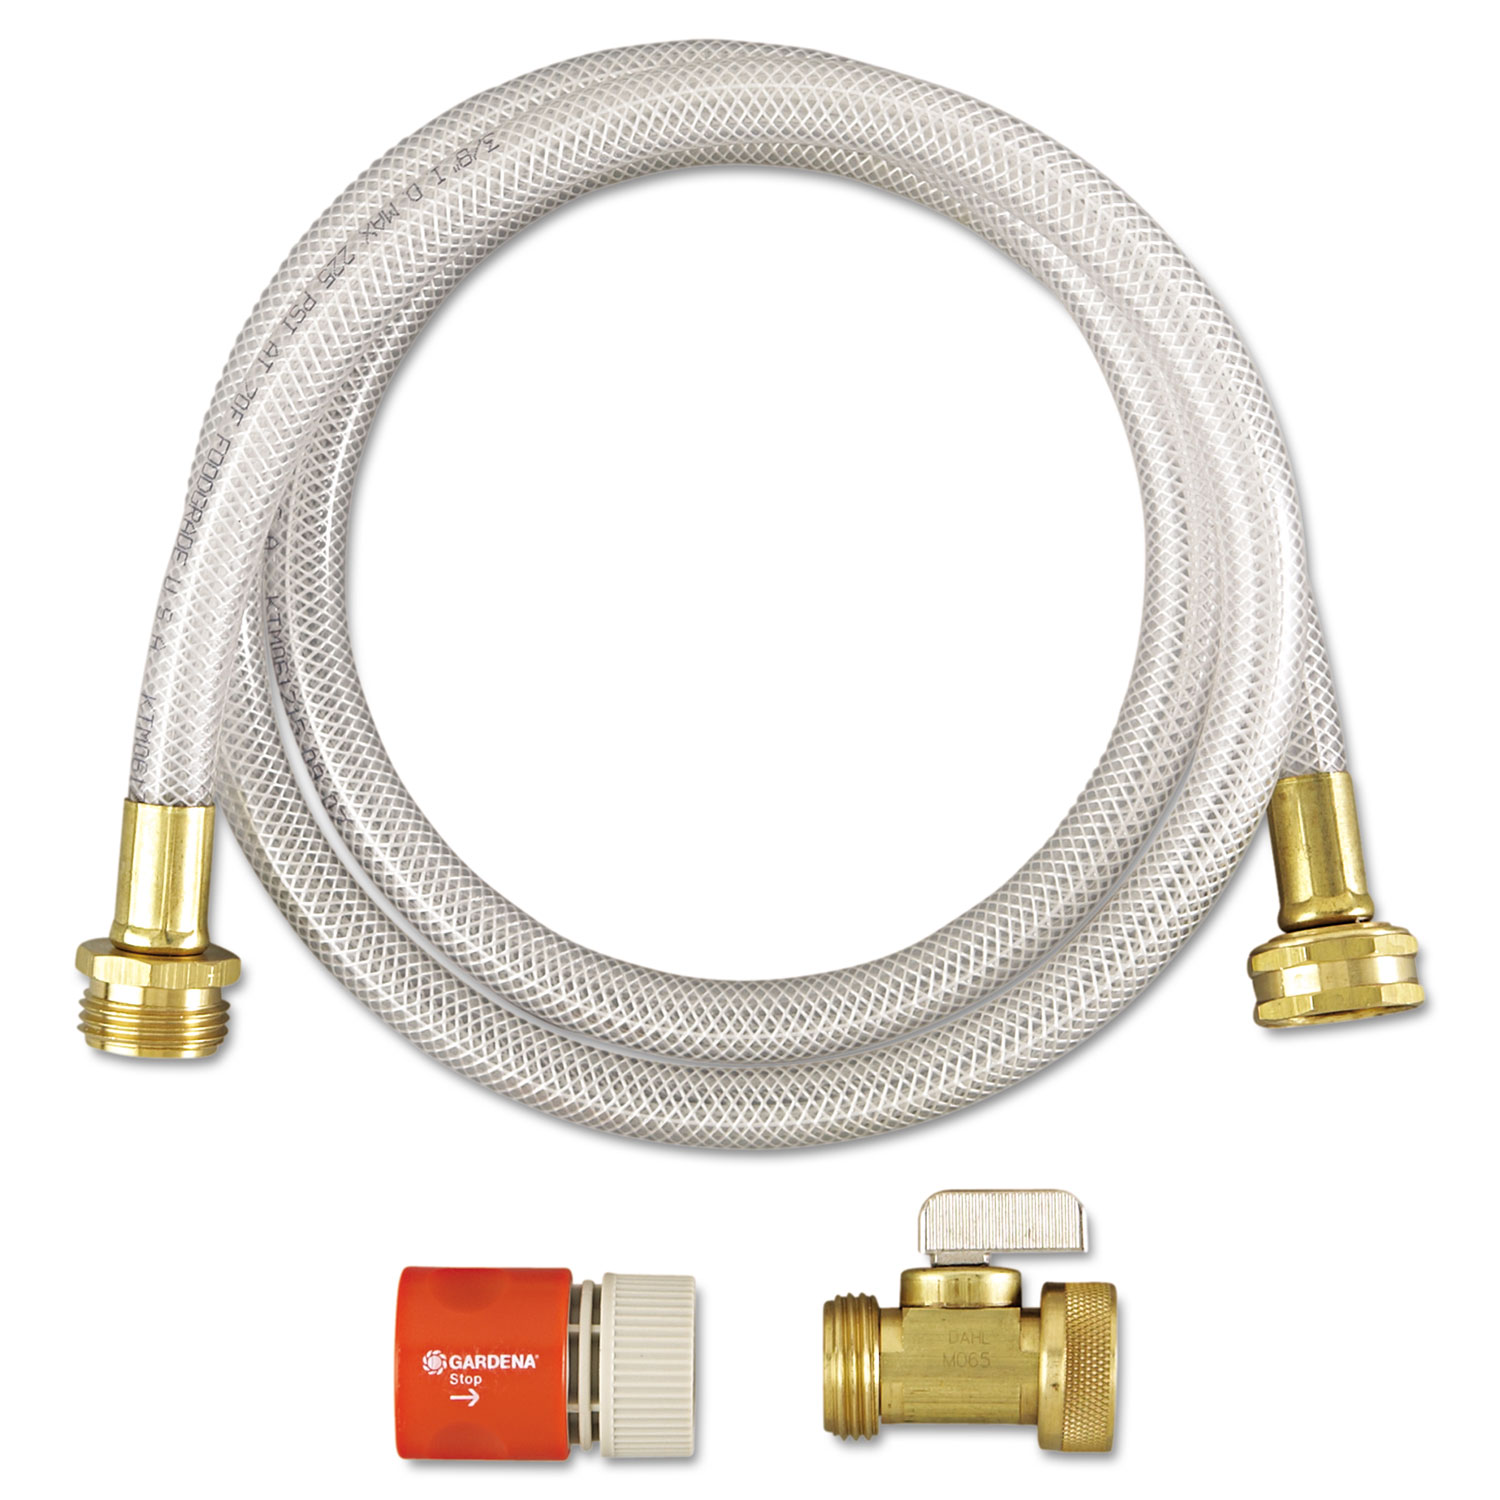  Diversey D3191746 RTD Water Hook-Up Kit, Switch, On/Off, 3/8 dia x 5ft (DVOD3191746) 